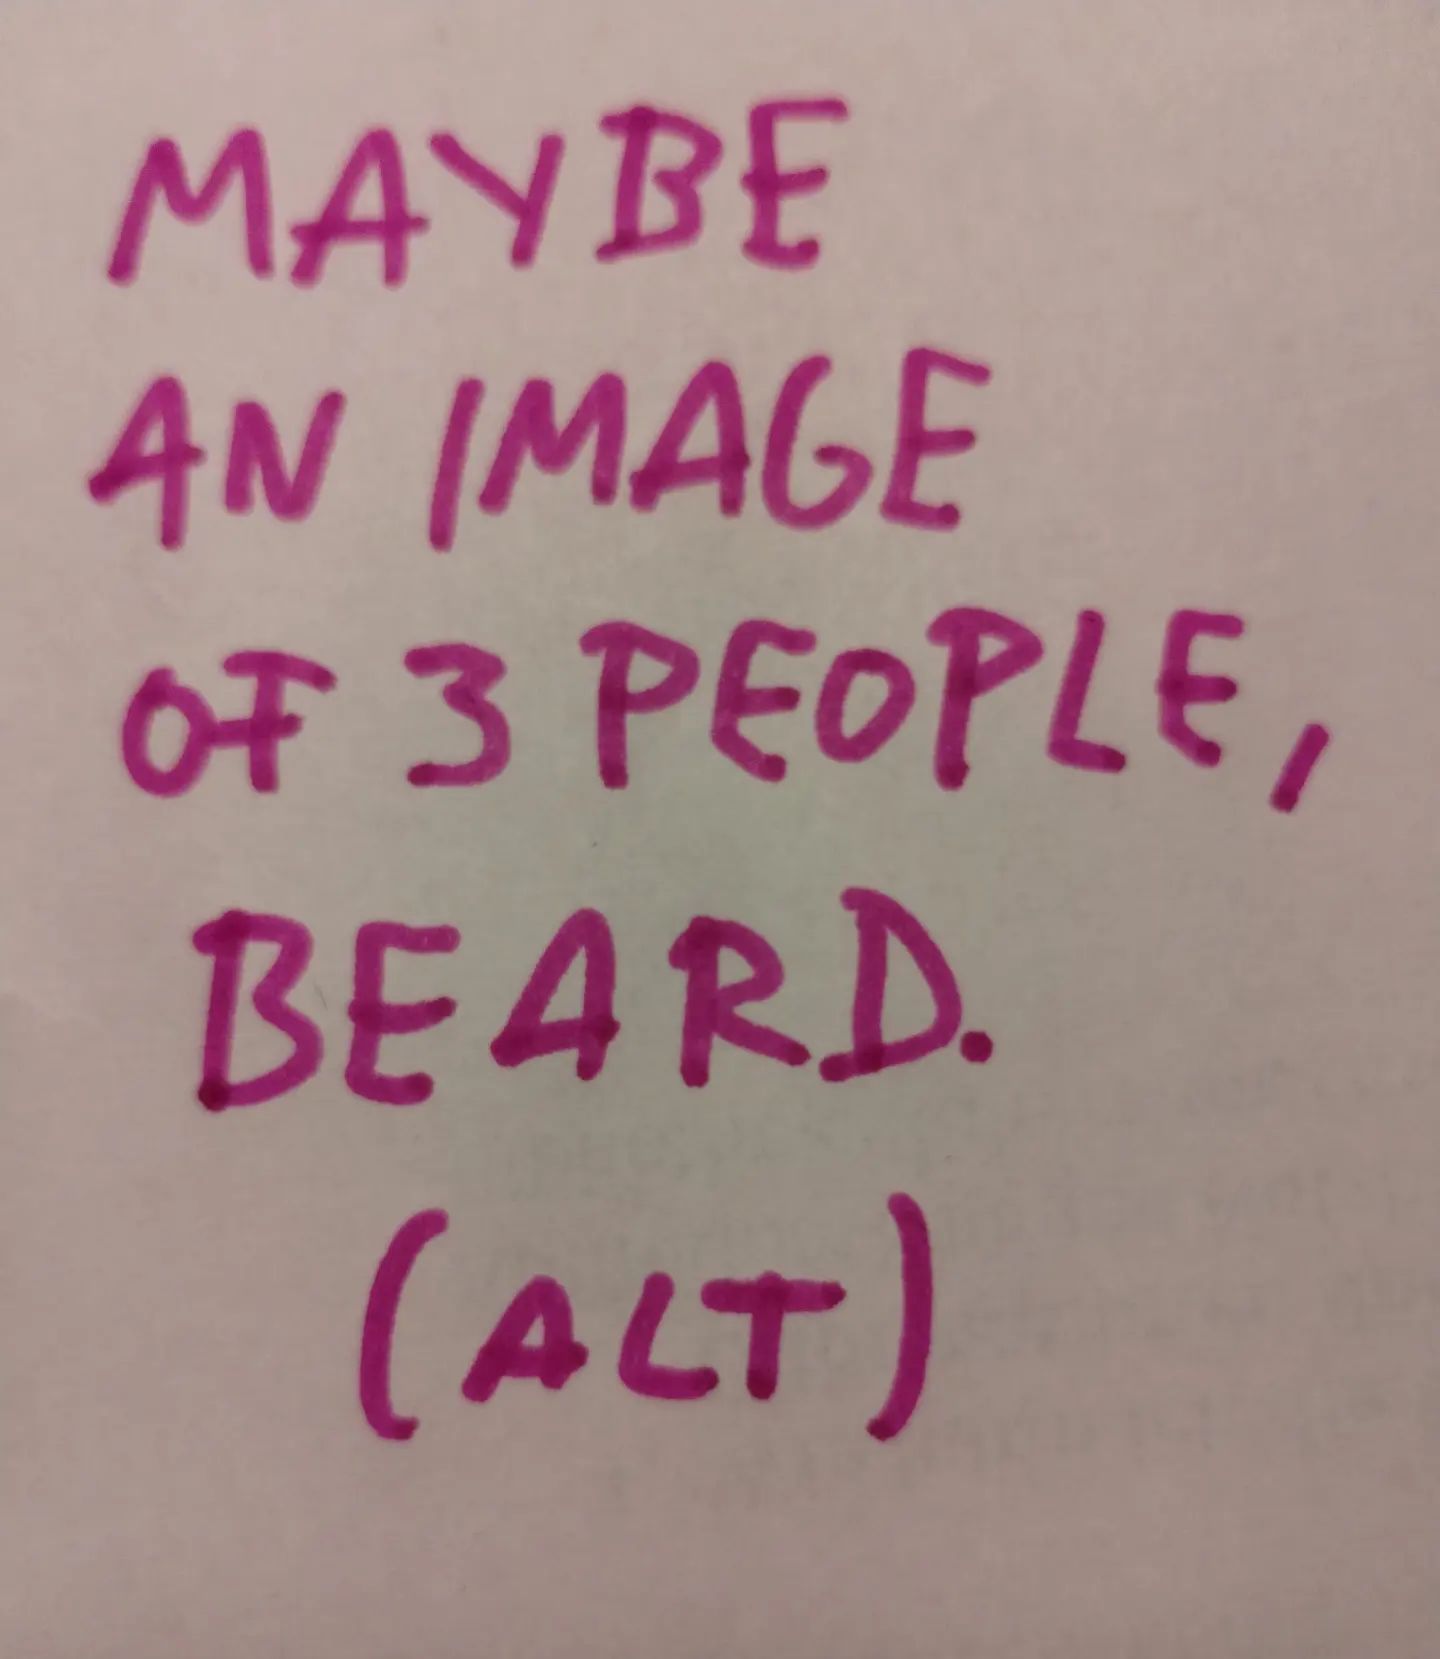 Photo of handwritten text on paper: Maybe an image of 3 people, beard.	(ALT)